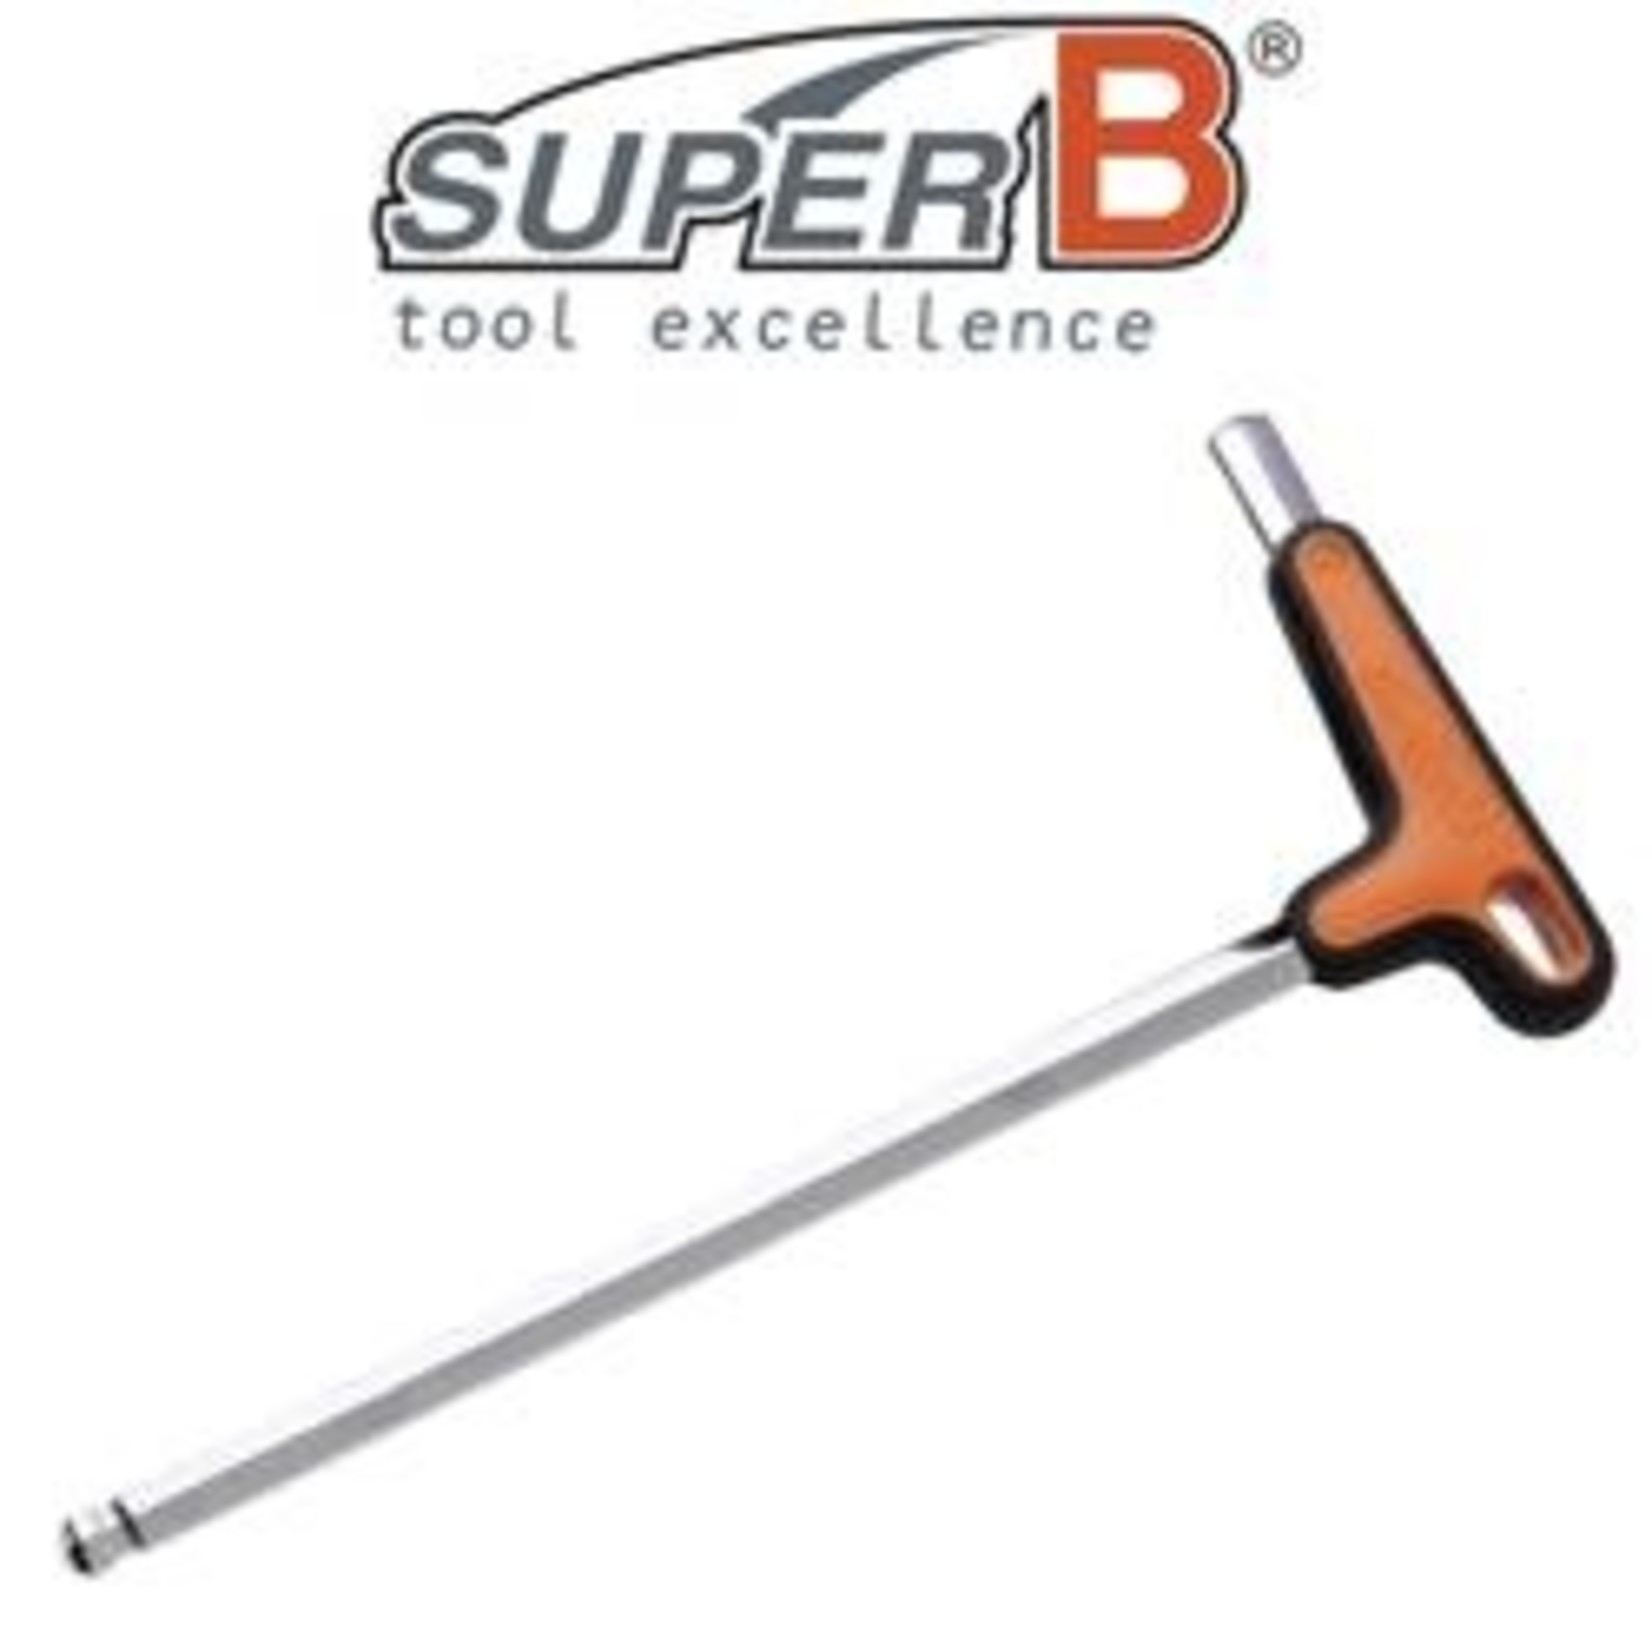 Super B SuperB T/L Handle Hex Wrench - 10mm Ball End - Made Of S2 Steel - Bike Tool